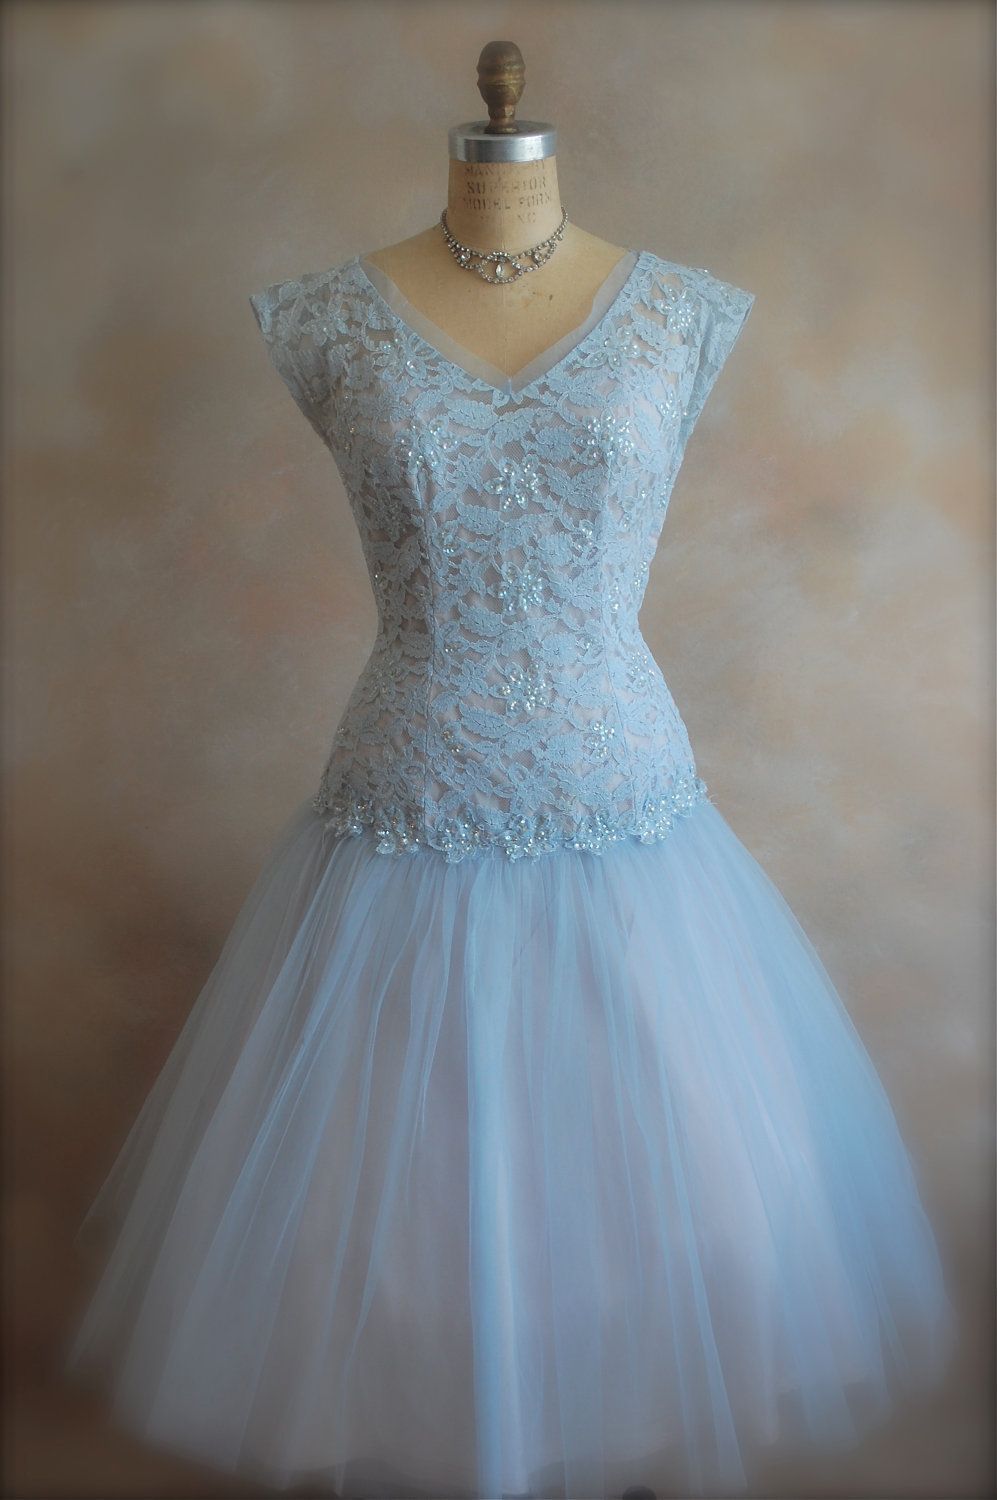 This ethereal powder blue 1950s dress features soft tulle and delicate lace.  #1